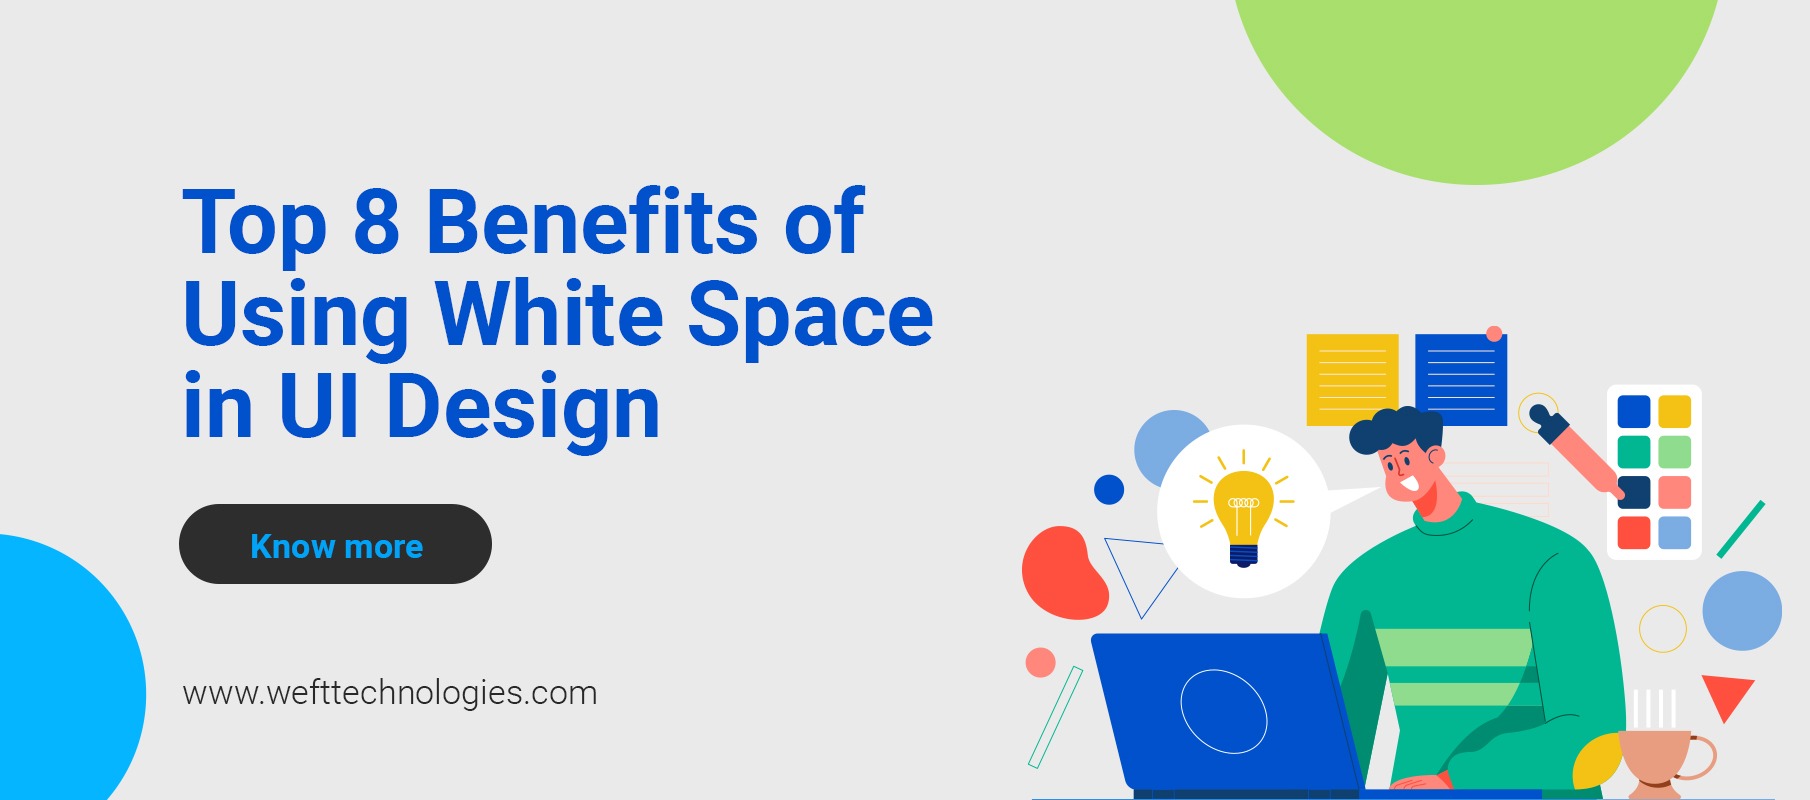 Top 8 Benefits of Using White Space in UI Design